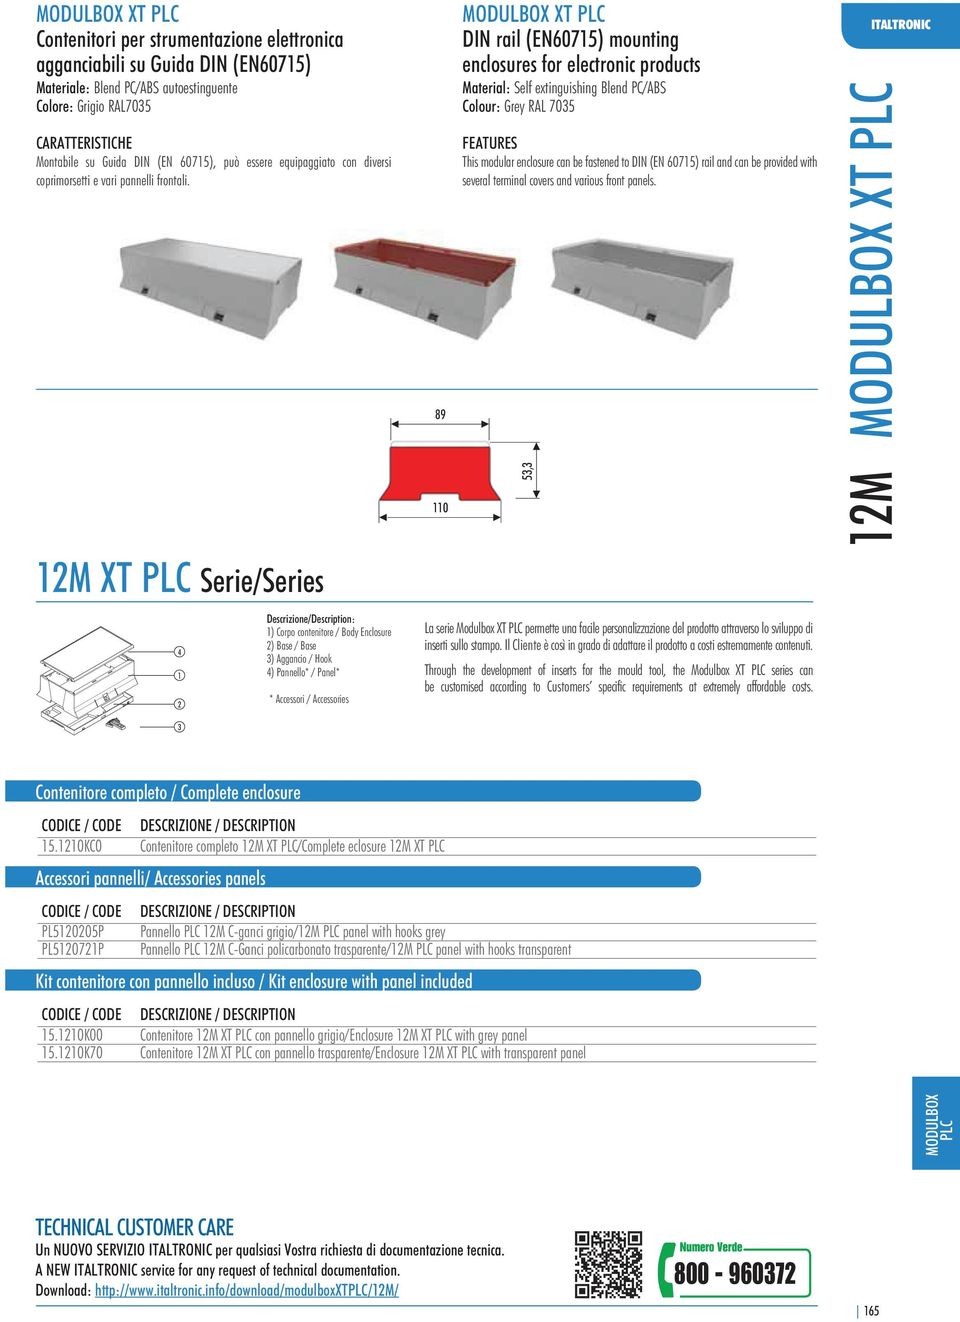 89 DIN rail (EN60715) mounting enclosures for electronic products Material: Self extinguishing Blend PC/ABS FEATURES This modular enclosure can be fastened to DIN (EN 60715) rail and can be provided